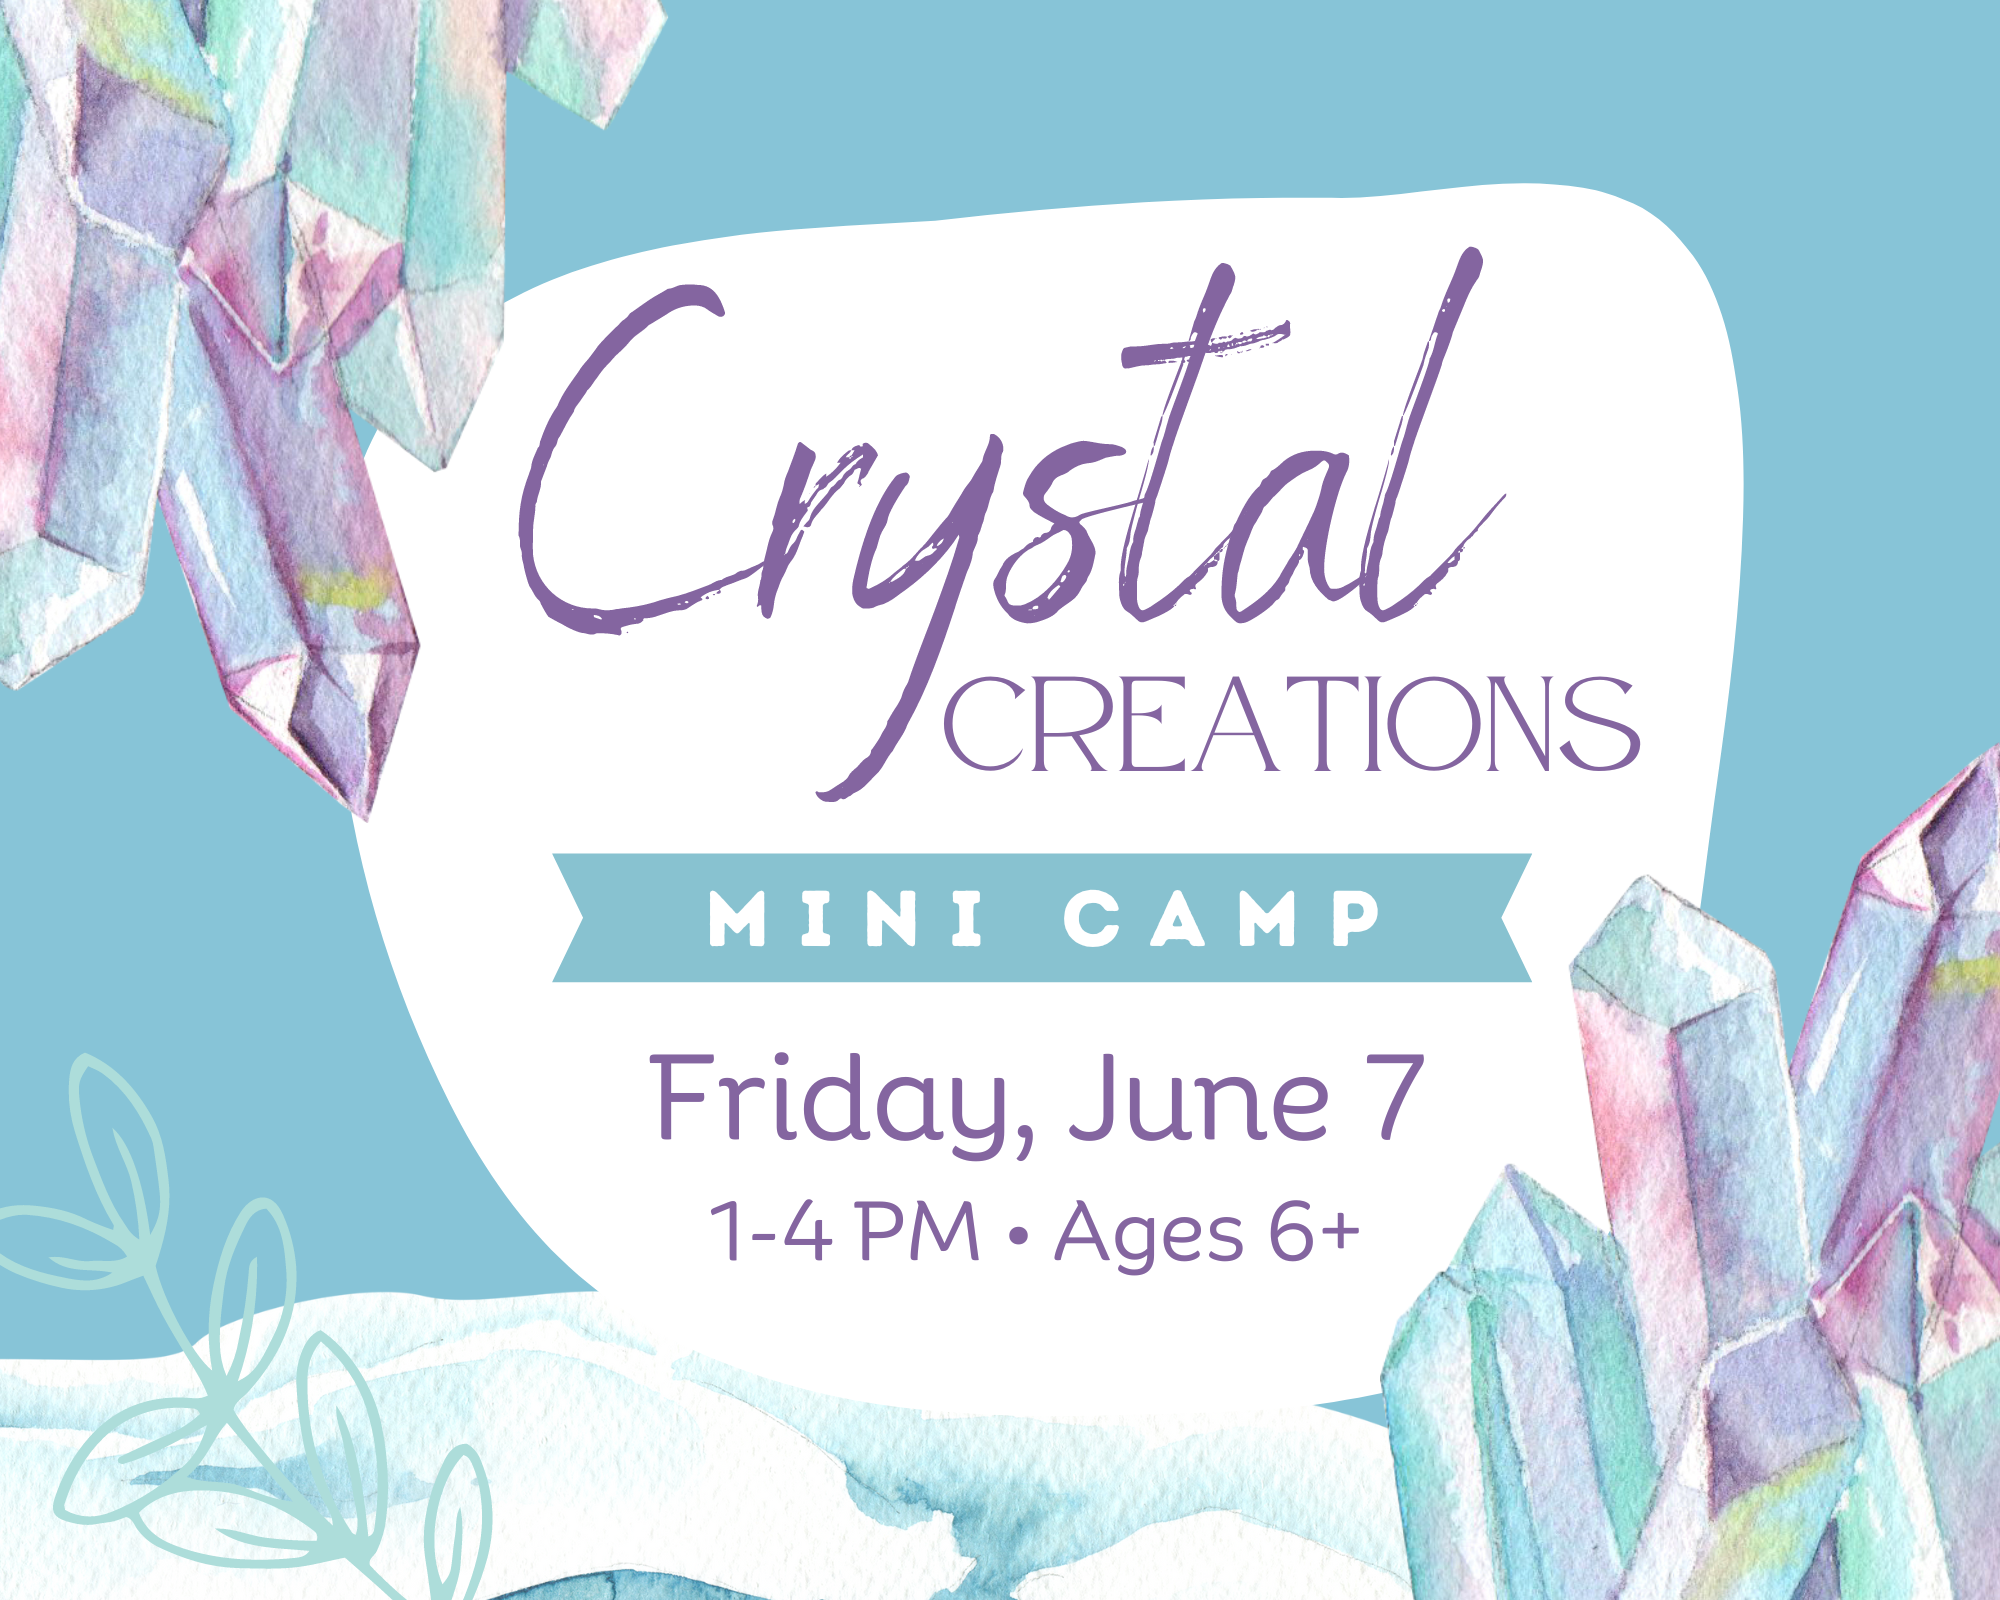 Maker's Summer Camp - Crystal Creations Mini Camp - Week 1 PM - Ages 6+